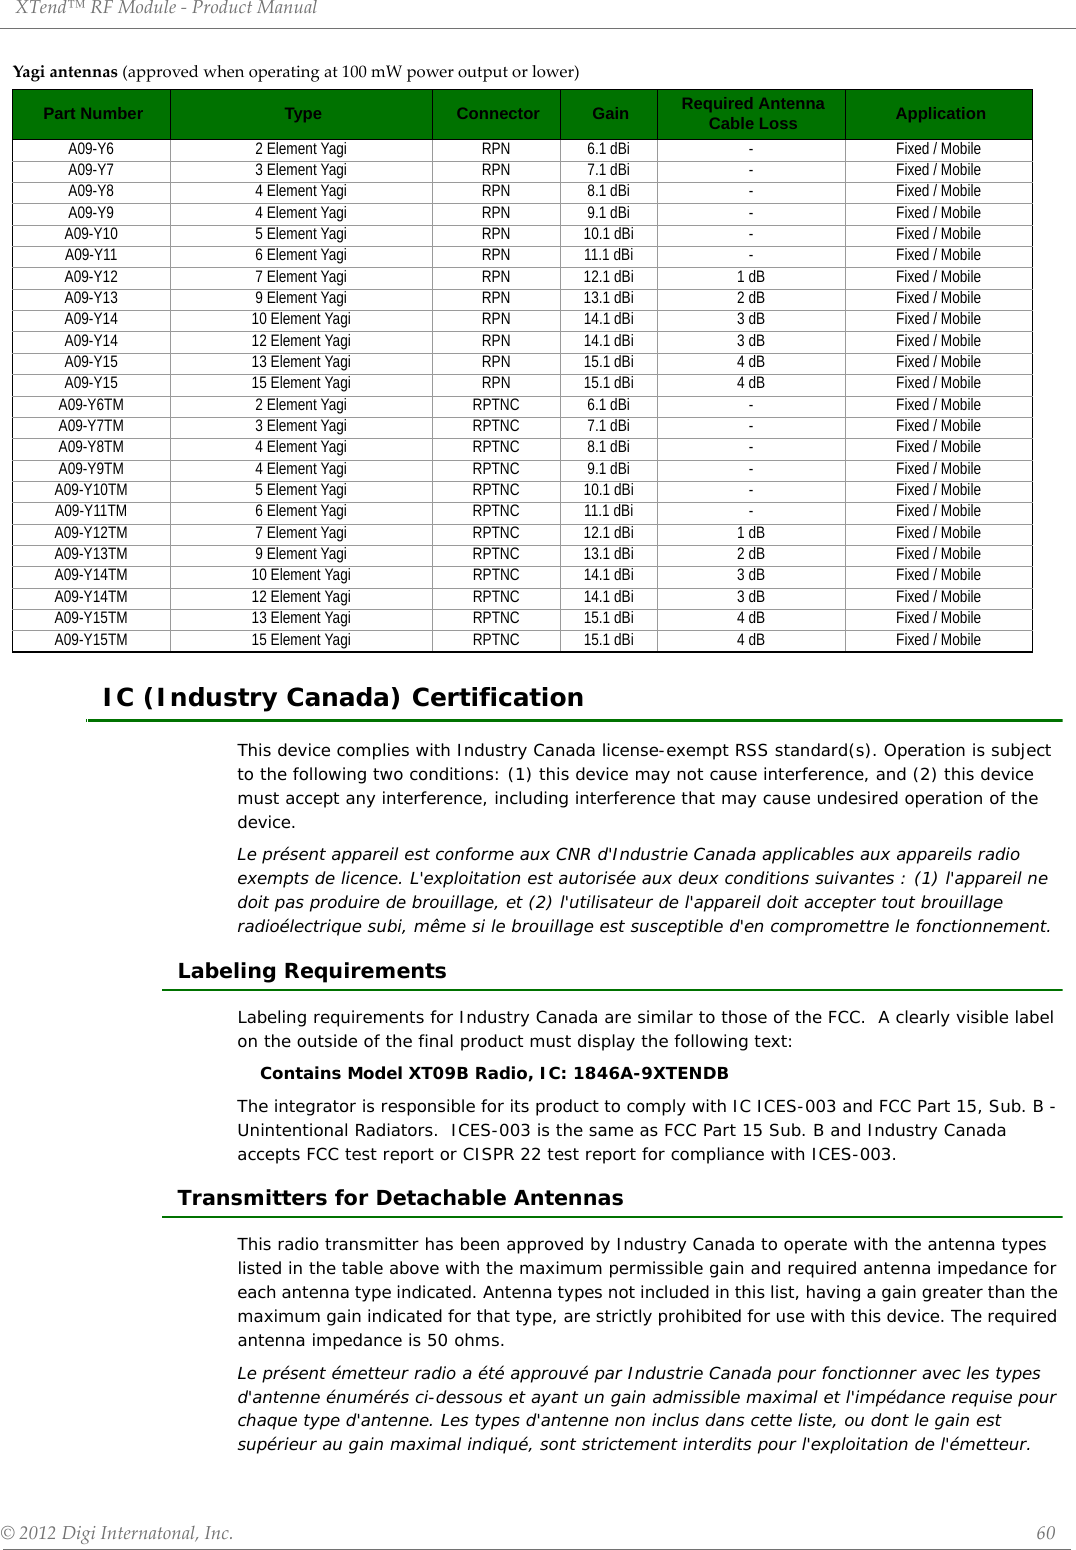 XTend™ RF Module - Product Manual © 2012 Digi Internatonal, Inc.      60     IC (Industry Canada) CertificationThis device complies with Industry Canada license-exempt RSS standard(s). Operation is subject to the following two conditions: (1) this device may not cause interference, and (2) this device must accept any interference, including interference that may cause undesired operation of the device. Le présent appareil est conforme aux CNR d&apos;Industrie Canada applicables aux appareils radio exempts de licence. L&apos;exploitation est autorisée aux deux conditions suivantes : (1) l&apos;appareil ne doit pas produire de brouillage, et (2) l&apos;utilisateur de l&apos;appareil doit accepter tout brouillage radioélectrique subi, même si le brouillage est susceptible d&apos;en compromettre le fonctionnement.Labeling RequirementsLabeling requirements for Industry Canada are similar to those of the FCC.  A clearly visible label on the outside of the final product must display the following text:Contains Model XT09B Radio, IC: 1846A-9XTENDBThe integrator is responsible for its product to comply with IC ICES-003 and FCC Part 15, Sub. B - Unintentional Radiators.  ICES-003 is the same as FCC Part 15 Sub. B and Industry Canada accepts FCC test report or CISPR 22 test report for compliance with ICES-003.Transmitters for Detachable AntennasThis radio transmitter has been approved by Industry Canada to operate with the antenna types listed in the table above with the maximum permissible gain and required antenna impedance for each antenna type indicated. Antenna types not included in this list, having a gain greater than the maximum gain indicated for that type, are strictly prohibited for use with this device. The required antenna impedance is 50 ohms.Le présent émetteur radio a été approuvé par Industrie Canada pour fonctionner avec les types d&apos;antenne énumérés ci-dessous et ayant un gain admissible maximal et l&apos;impédance requise pour chaque type d&apos;antenne. Les types d&apos;antenne non inclus dans cette liste, ou dont le gain est supérieur au gain maximal indiqué, sont strictement interdits pour l&apos;exploitation de l&apos;émetteur.Yagi antennas (approved when operating at 100 mW power output or lower)Part Number Type Connector Gain Required Antenna Cable Loss ApplicationA09-Y6 2 Element Yagi RPN 6.1 dBi - Fixed / MobileA09-Y7 3 Element Yagi RPN 7.1 dBi - Fixed / MobileA09-Y8 4 Element Yagi RPN 8.1 dBi - Fixed / MobileA09-Y9 4 Element Yagi RPN 9.1 dBi - Fixed / MobileA09-Y10 5 Element Yagi RPN 10.1 dBi - Fixed / MobileA09-Y11 6 Element Yagi RPN 11.1 dBi - Fixed / MobileA09-Y12 7 Element Yagi RPN 12.1 dBi 1 dB Fixed / MobileA09-Y13 9 Element Yagi RPN 13.1 dBi 2 dB Fixed / MobileA09-Y14 10 Element Yagi RPN 14.1 dBi 3 dB Fixed / MobileA09-Y14 12 Element Yagi RPN 14.1 dBi 3 dB Fixed / MobileA09-Y15 13 Element Yagi RPN 15.1 dBi 4 dB Fixed / MobileA09-Y15 15 Element Yagi RPN 15.1 dBi 4 dB Fixed / MobileA09-Y6TM 2 Element Yagi RPTNC 6.1 dBi - Fixed / MobileA09-Y7TM 3 Element Yagi RPTNC 7.1 dBi - Fixed / MobileA09-Y8TM 4 Element Yagi RPTNC 8.1 dBi - Fixed / MobileA09-Y9TM 4 Element Yagi RPTNC 9.1 dBi - Fixed / MobileA09-Y10TM 5 Element Yagi RPTNC 10.1 dBi - Fixed / MobileA09-Y11TM 6 Element Yagi RPTNC 11.1 dBi - Fixed / MobileA09-Y12TM 7 Element Yagi RPTNC 12.1 dBi 1 dB Fixed / MobileA09-Y13TM 9 Element Yagi RPTNC 13.1 dBi 2 dB Fixed / MobileA09-Y14TM 10 Element Yagi RPTNC 14.1 dBi 3 dB Fixed / MobileA09-Y14TM 12 Element Yagi RPTNC 14.1 dBi 3 dB Fixed / MobileA09-Y15TM 13 Element Yagi RPTNC 15.1 dBi 4 dB Fixed / MobileA09-Y15TM 15 Element Yagi RPTNC 15.1 dBi 4 dB Fixed / Mobile